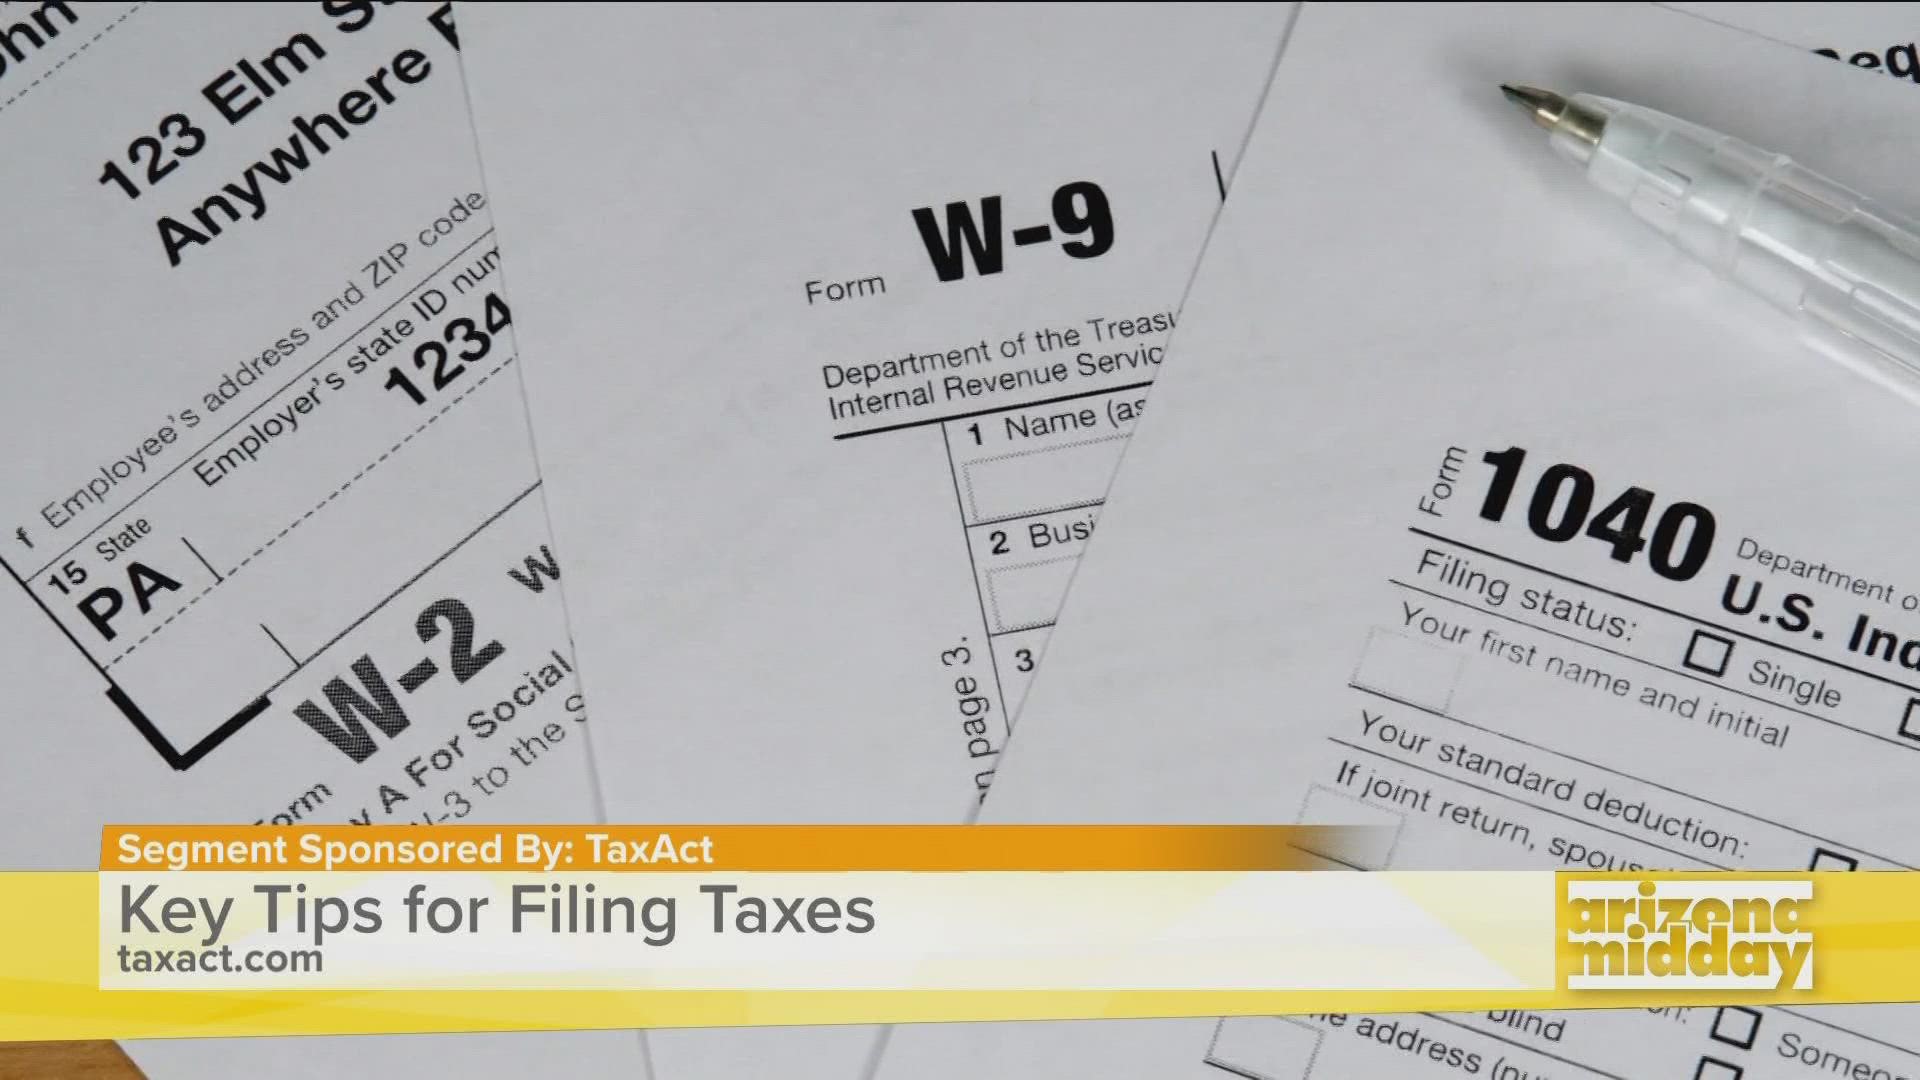 VP of Tax Development Mark Jaeger helps you gear up to file taxes this season with all the tips and tricks!